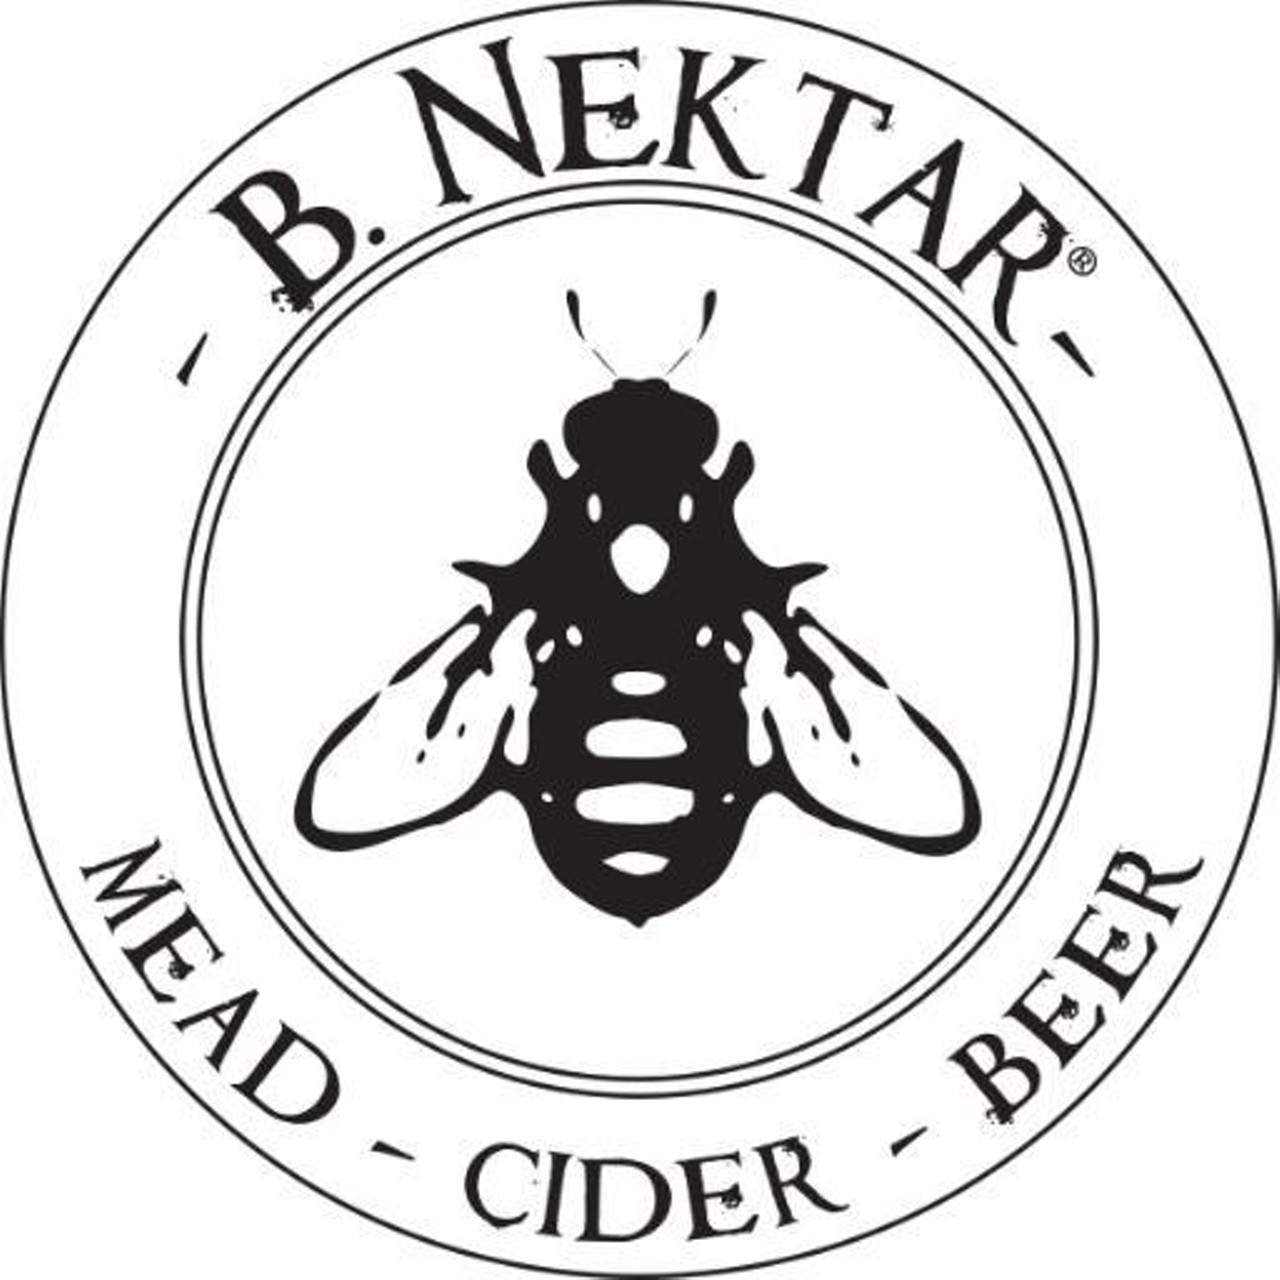 Saturday, May 7 - 
Spring Mead Fest
@ B. Nektar Meadery - 
These days there are, like, a zillion beer fests that happen all over the state &#151; and that&#146;s great. Trust us, there&#146;s no one who loves craft beer like the folks who work at the Metro Times. Of course, it&#146;s nice to switch things up every once in awhile, and the Spring Mead Fest that&#146;s taking place at B. Nektar Meadery in Ferndale (our neighbor, of sorts) is doing just that. The craft meadery will have two special releases on hand &#151; Milton&#146;s Madness: I Said NO Salt and the Zombies take Manhattan &#151; plus a selection of meads, ciders, beers, and cocktails. There will also be food from the Shimmy Shack, Slows to Go, Hero or Villian Food Truck, Delectabowl, and Treat Dreams. There will also be entertainment will be provided by Detroit&#146;s Duende, Dutch Pink, and AwesomeR.  
Runs from 2-8 p.m.; 1511 Jarvis St., Ferndale; bnektar.com; 313-744-6323; free.